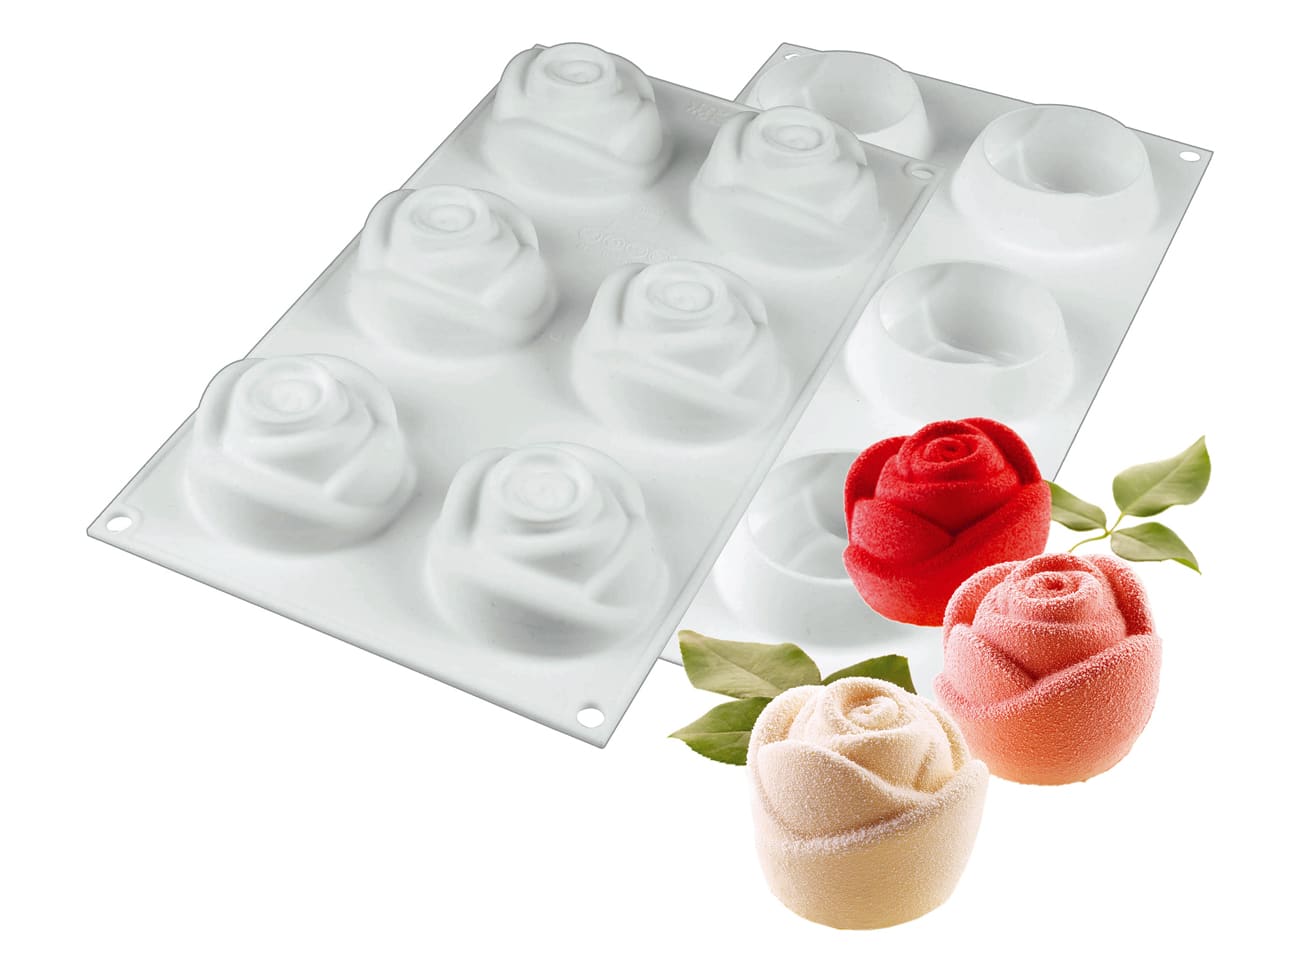 Silikomart SF077 SiliconFLEX 6 Compartment Rose Silicone Baking Mold - 3 x  3 x 1 9/16 Cavities